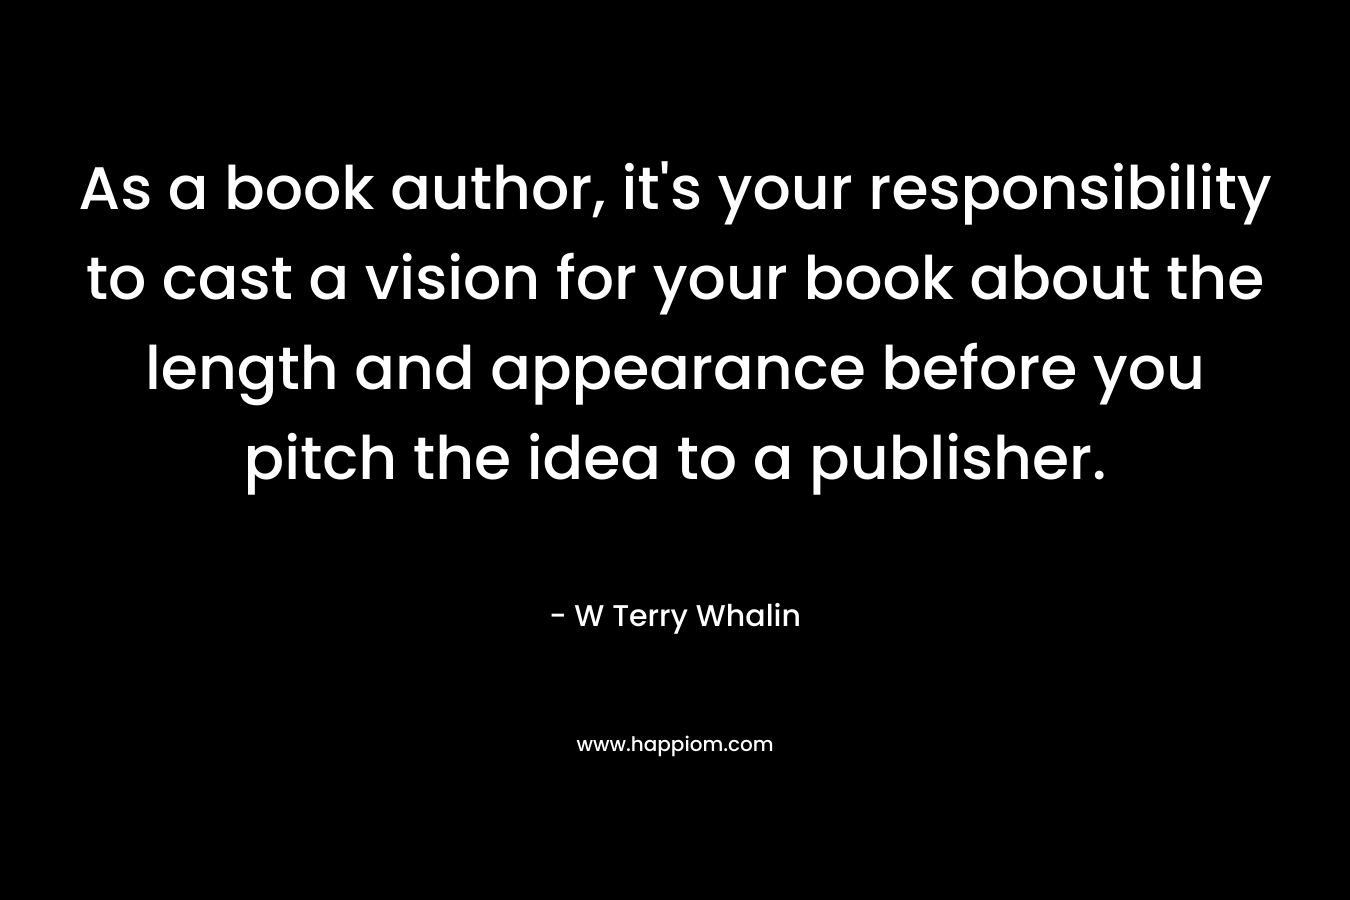 As a book author, it’s your responsibility to cast a vision for your book about the length and appearance before you pitch the idea to a publisher. – W Terry Whalin